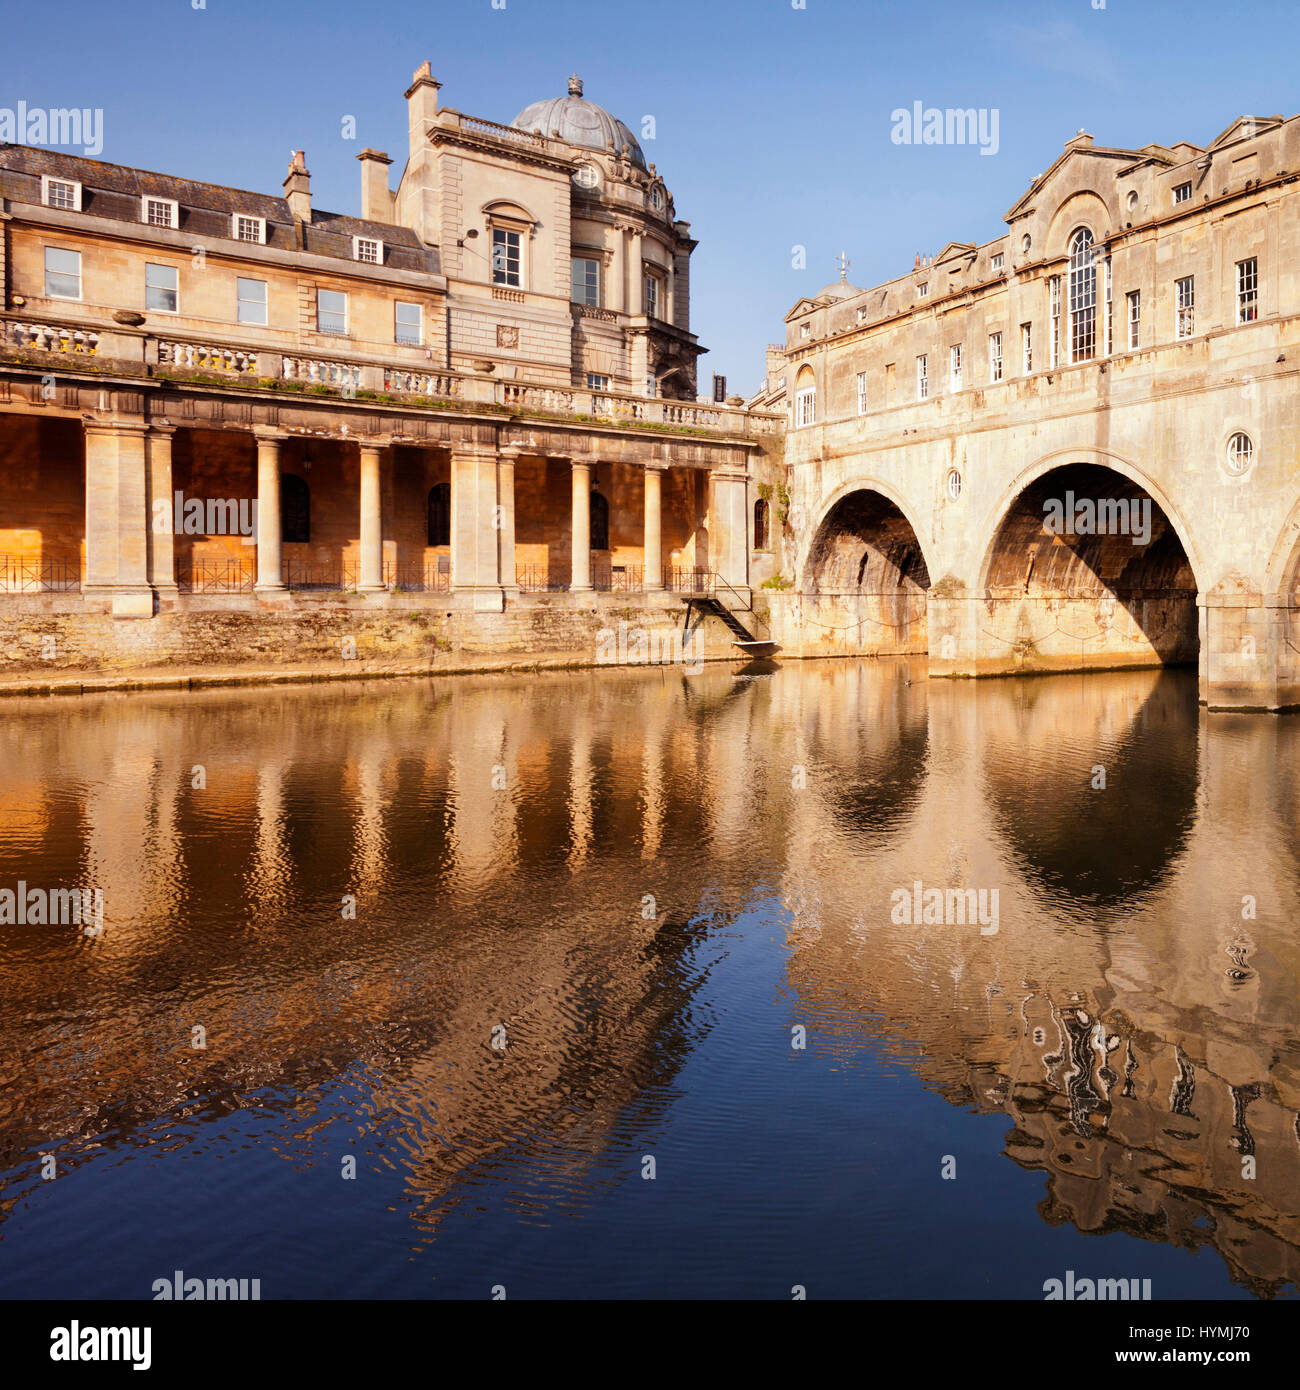 Pulteney Bridge and Colonnade, Bath, England, on a bright spring morning, reflected in the River Avon. The bridge was designed by Robert Adam and comp Stock Photo